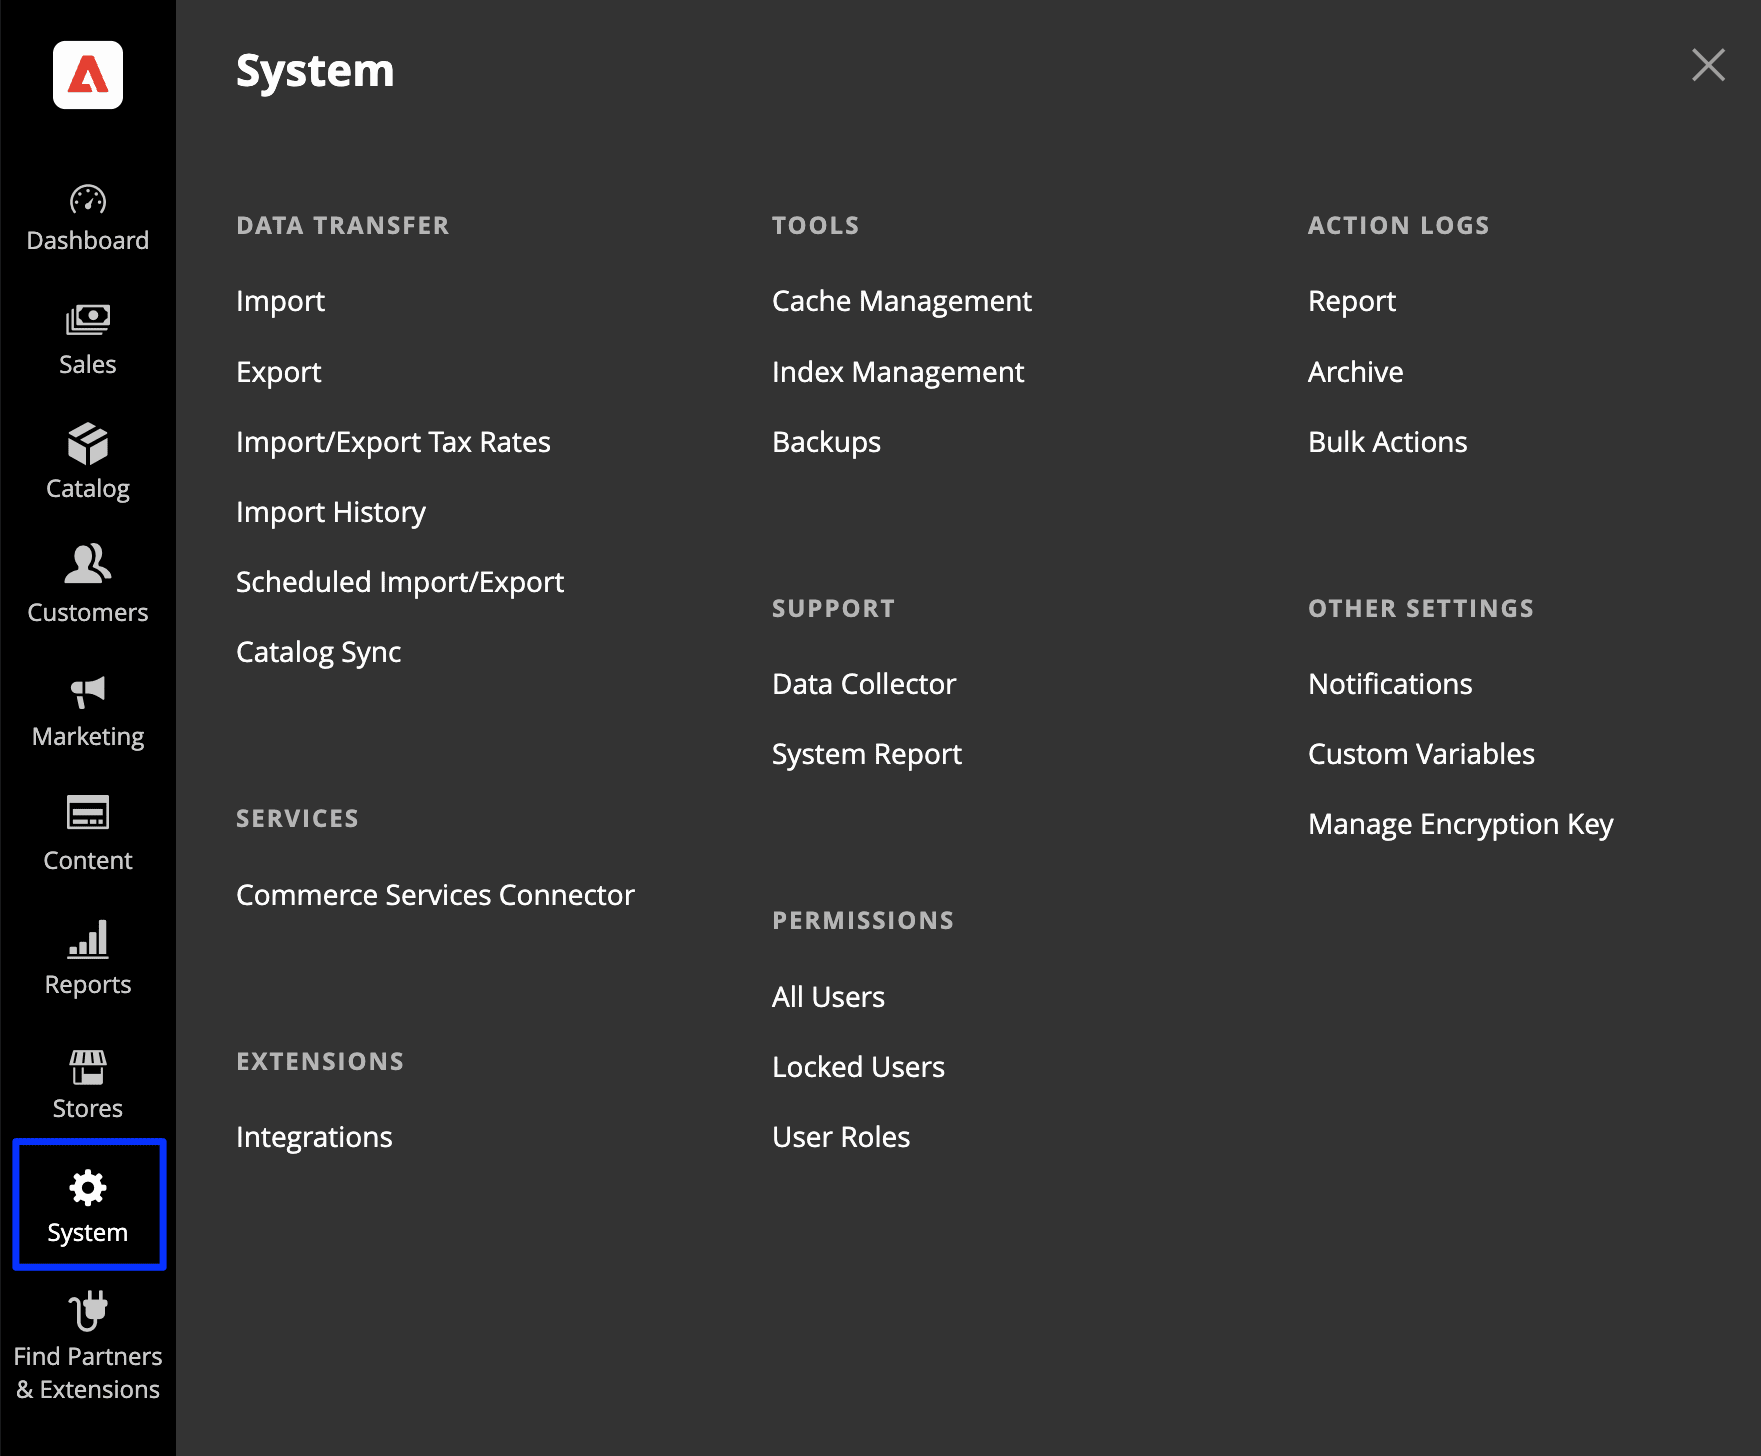 The system menu for managing permissions, data, integrations, and other admin-level tasks.